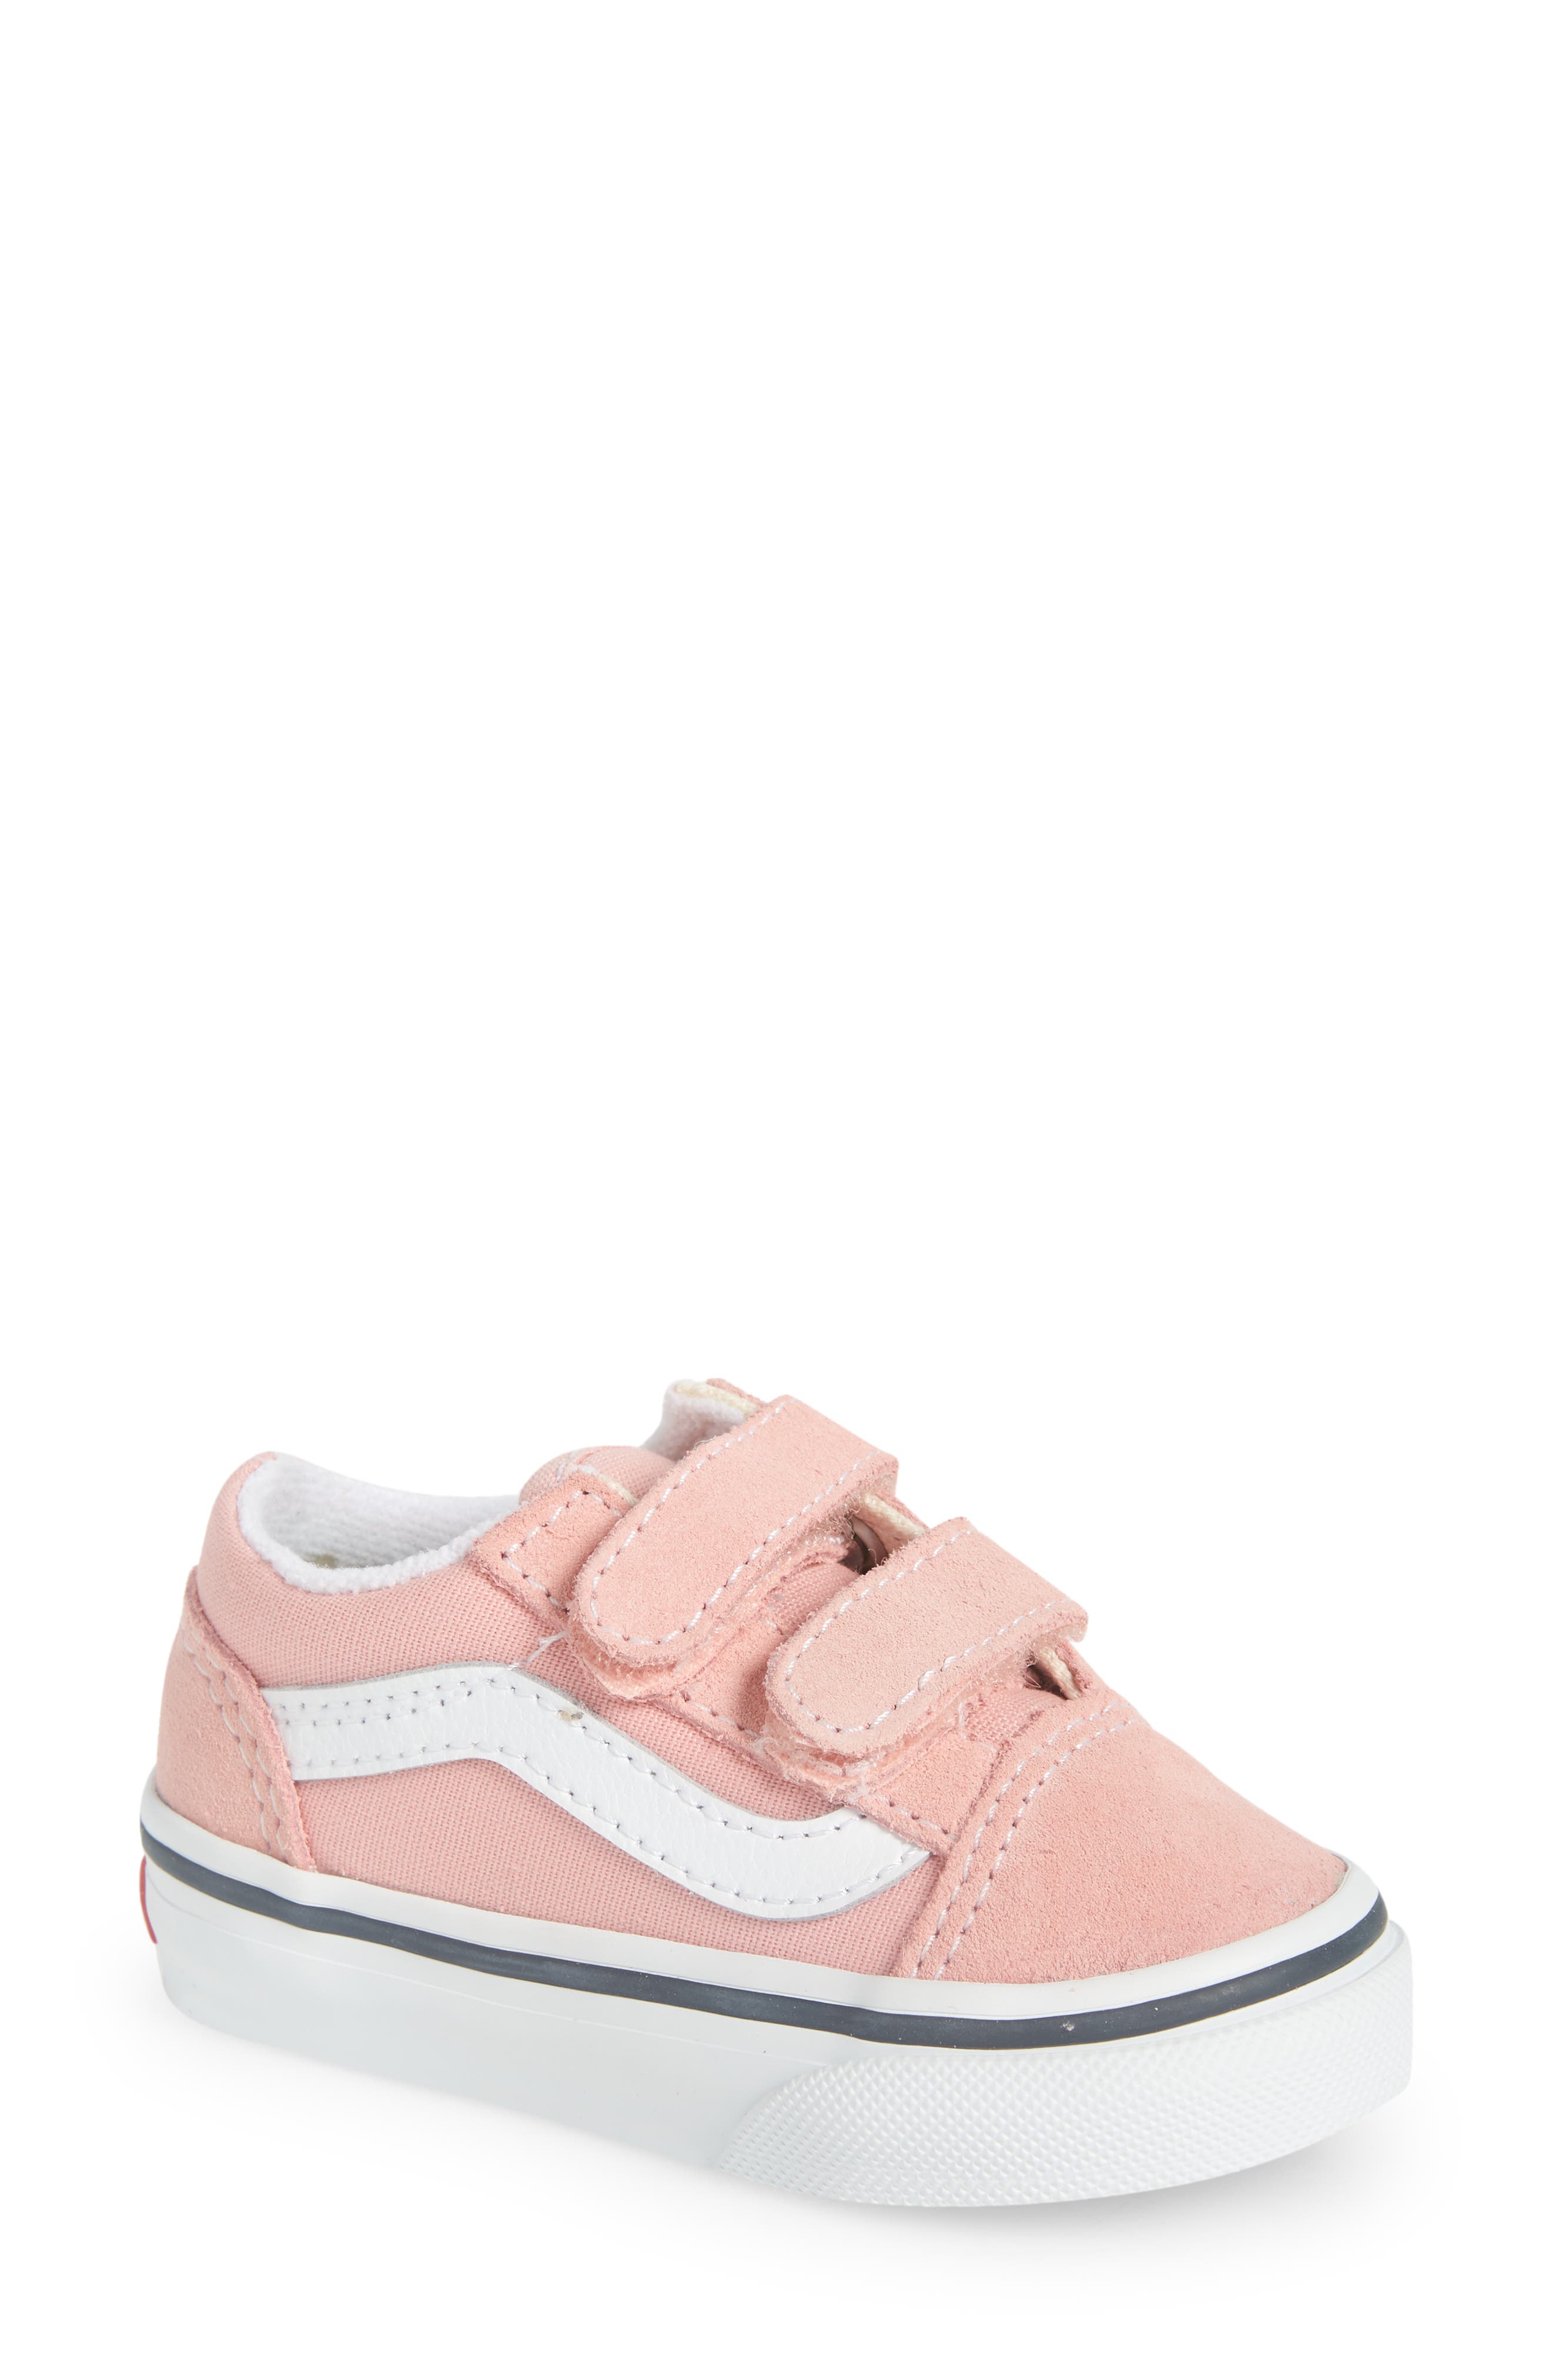 white baby vans shoes